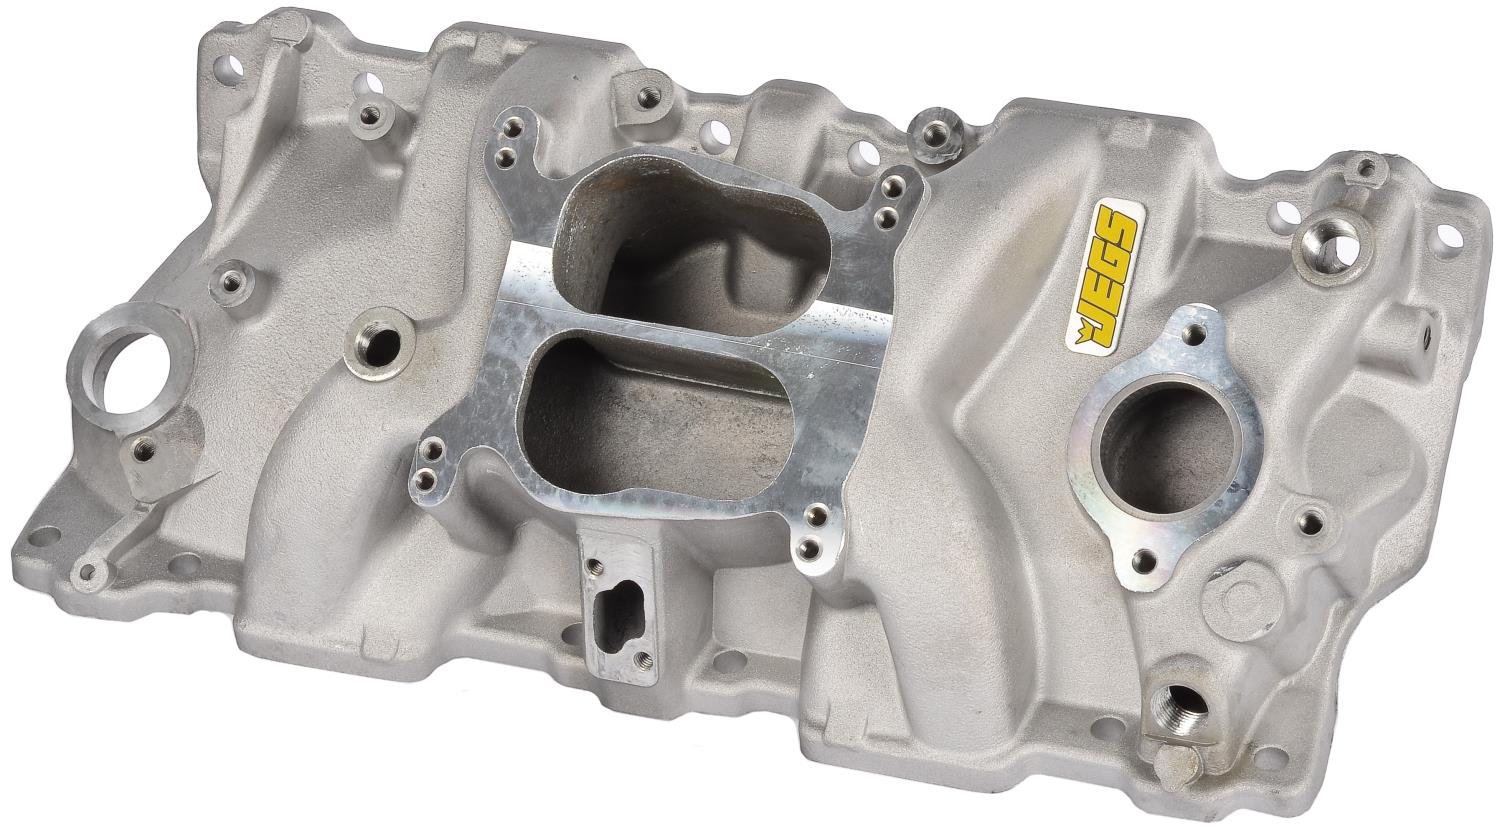 Intake Manifold for 1955-1986 Small Block Chevy 262-400,